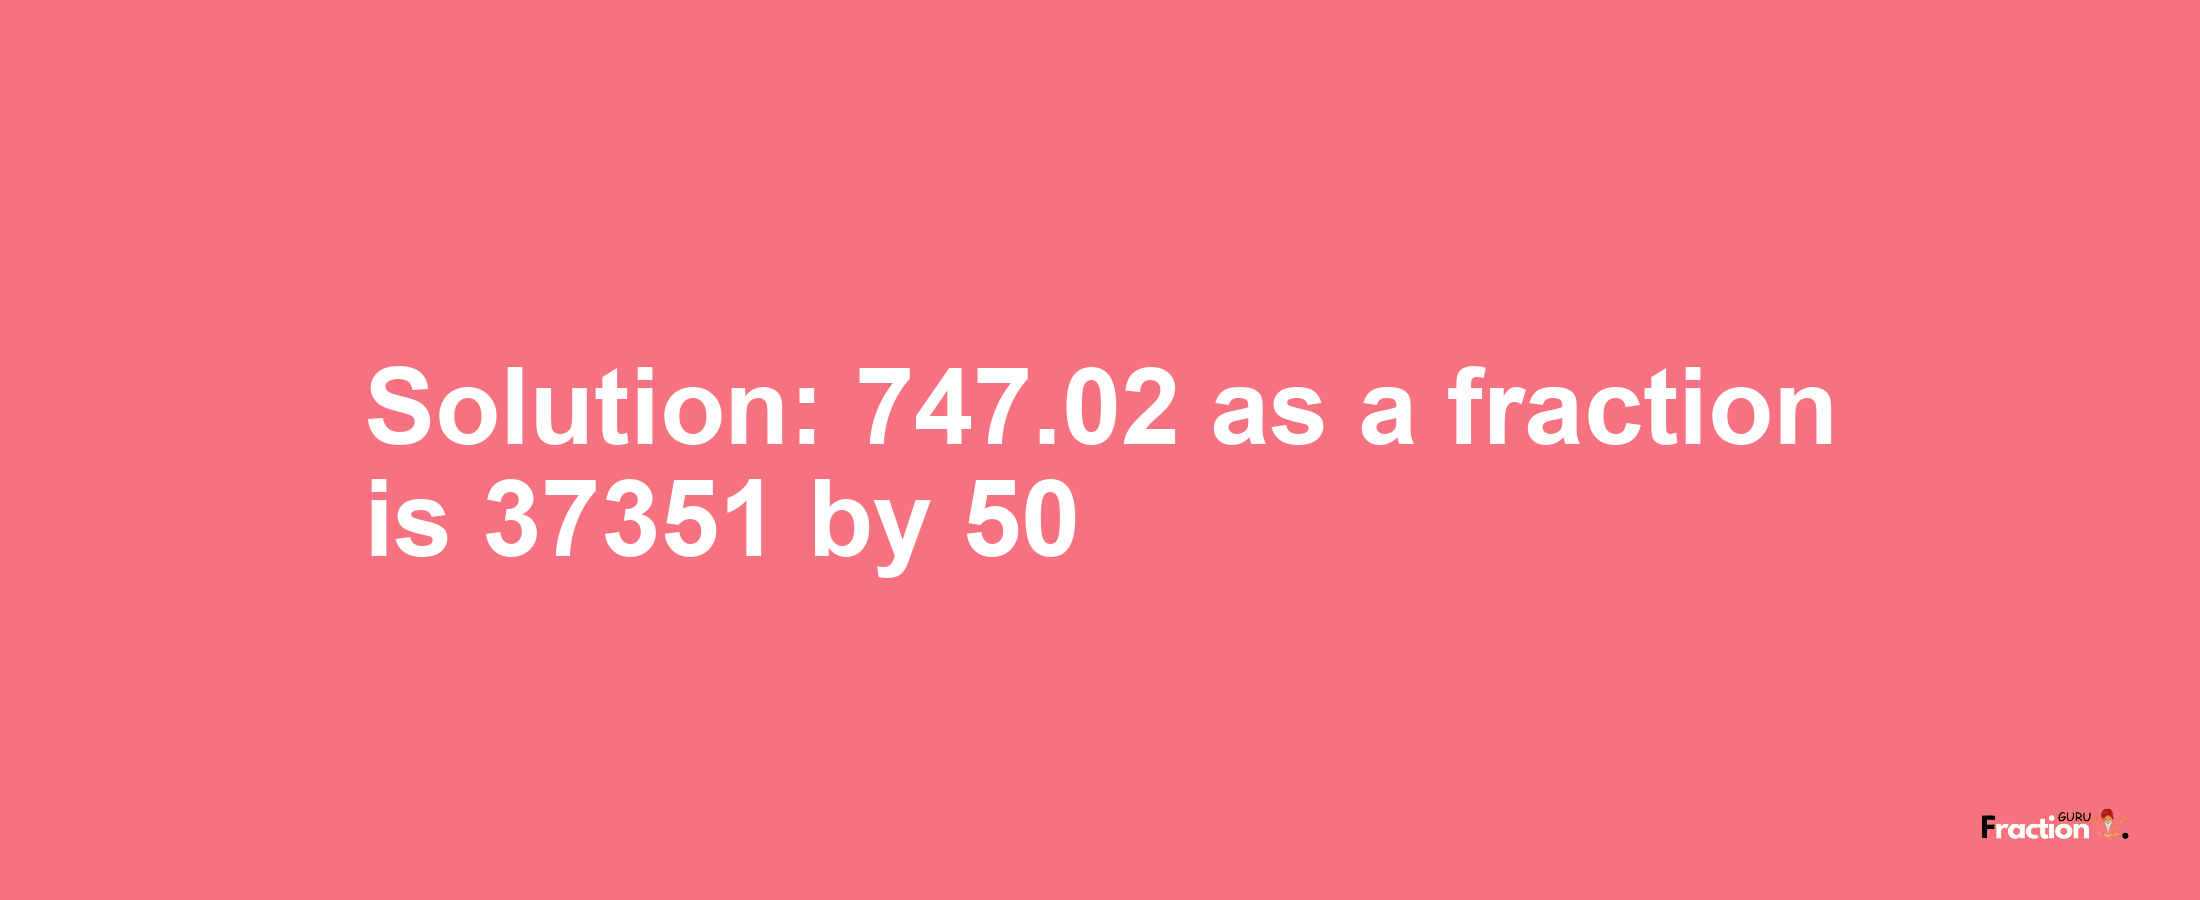 Solution:747.02 as a fraction is 37351/50